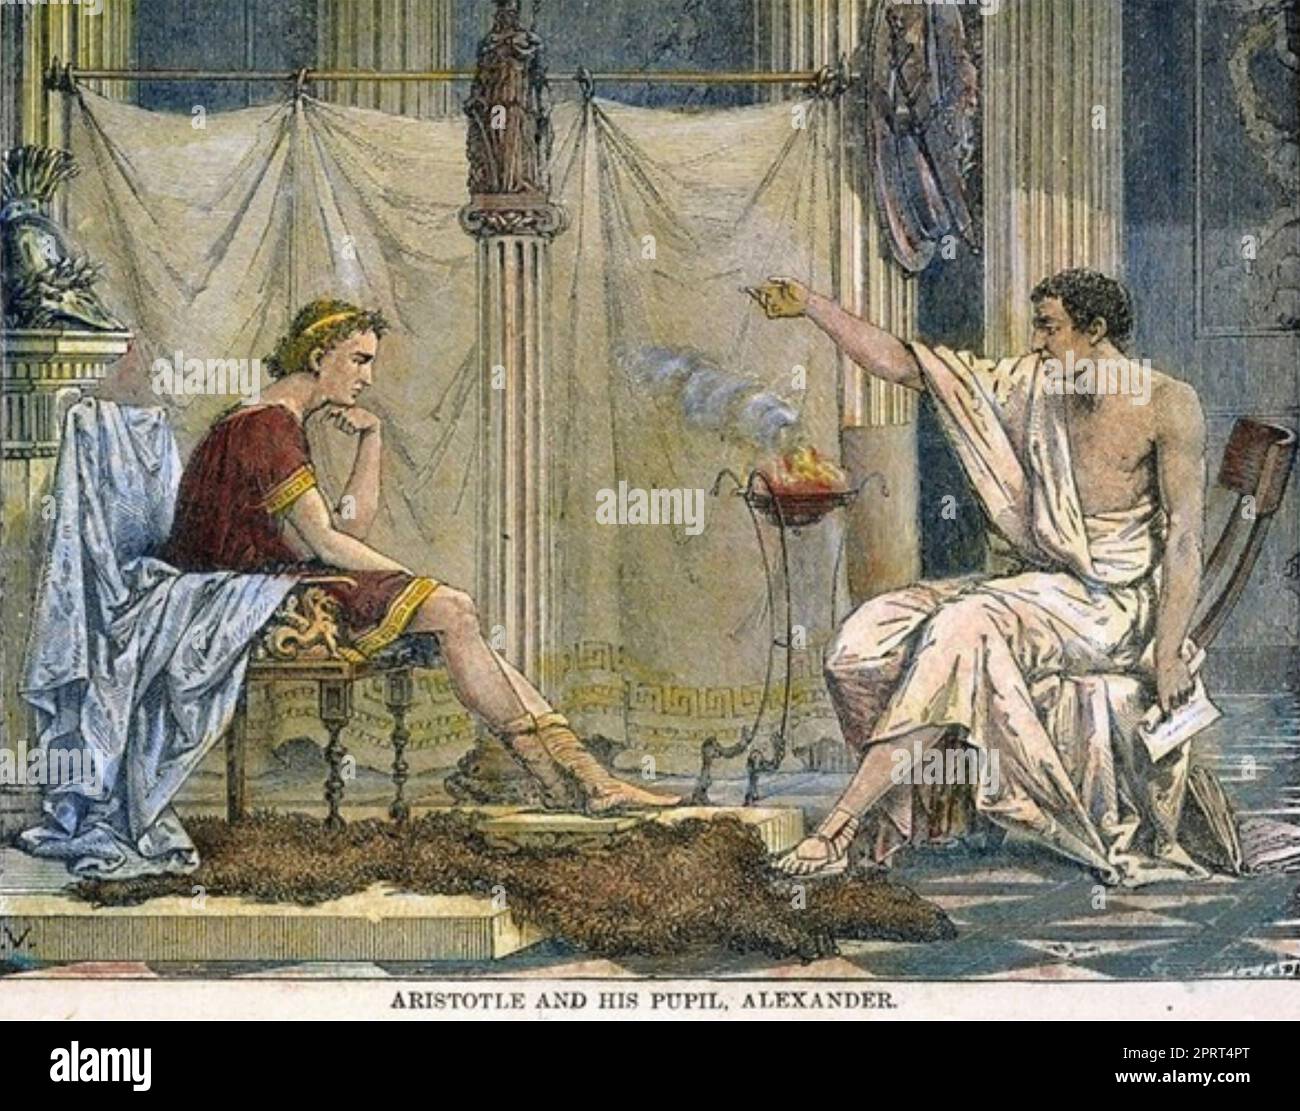 ARISTOTLE (384-322 BC) Greek philosopher at right teaching Alexander the Great in an 18th century illustration Stock Photo